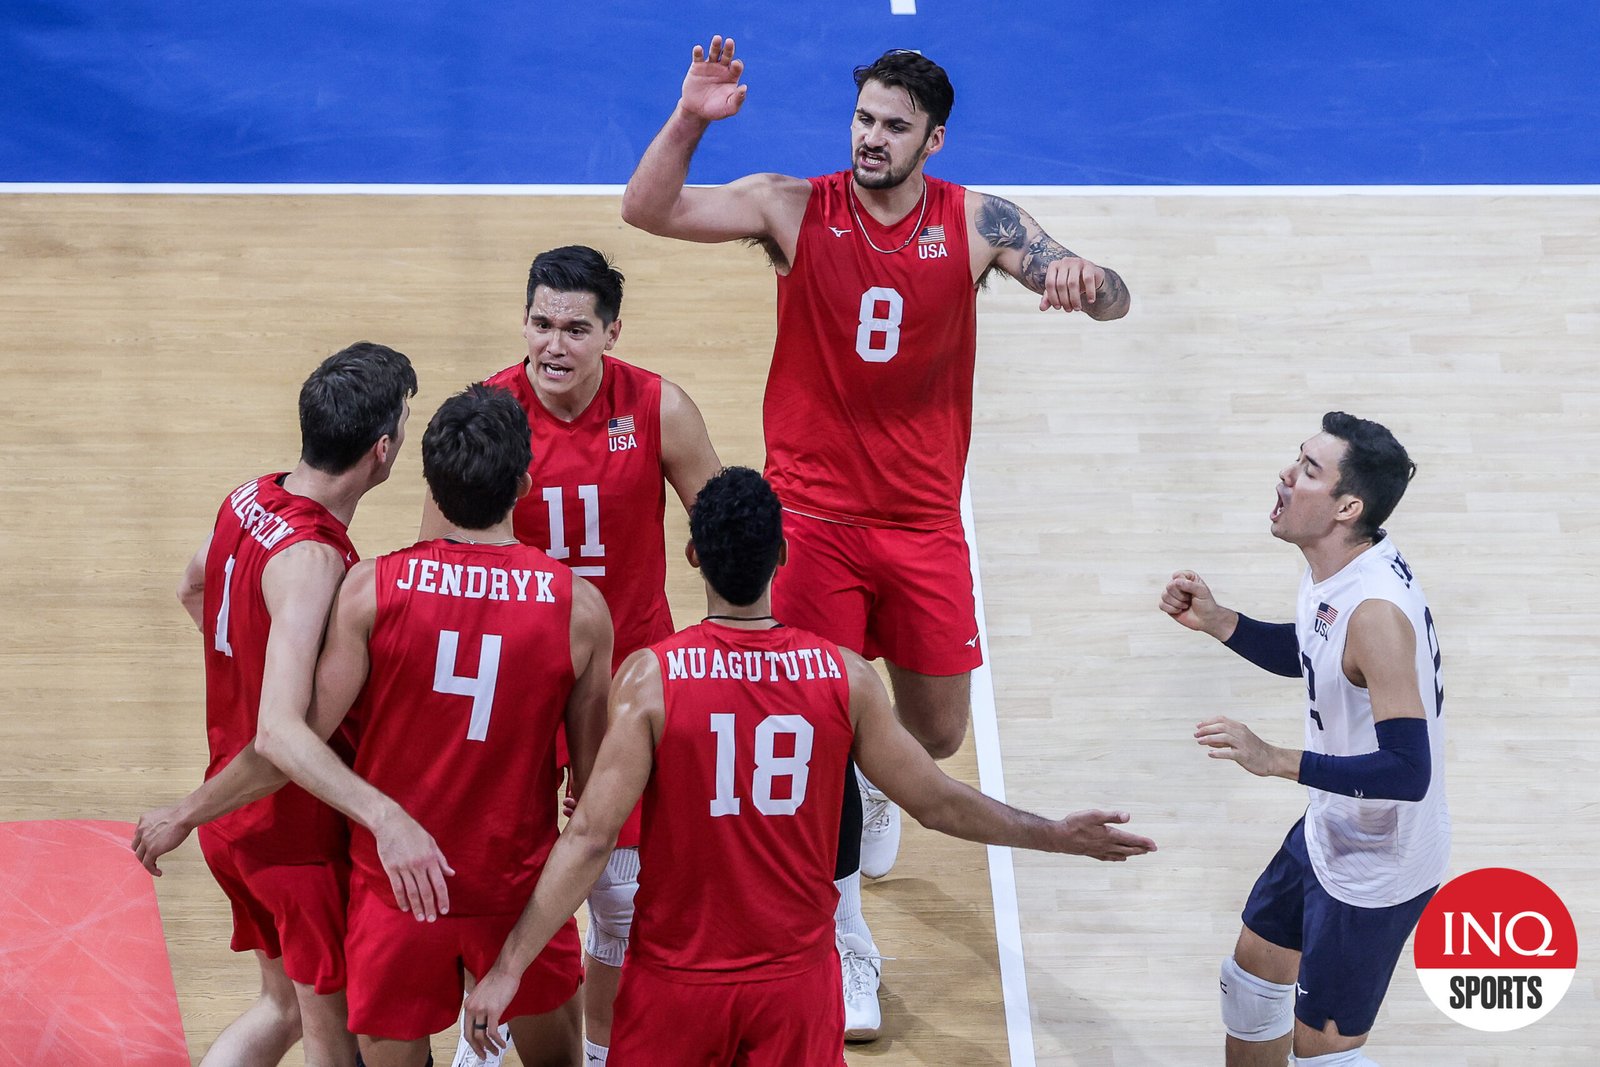 Micah Christenson, USA grateful for fans’ support in loss